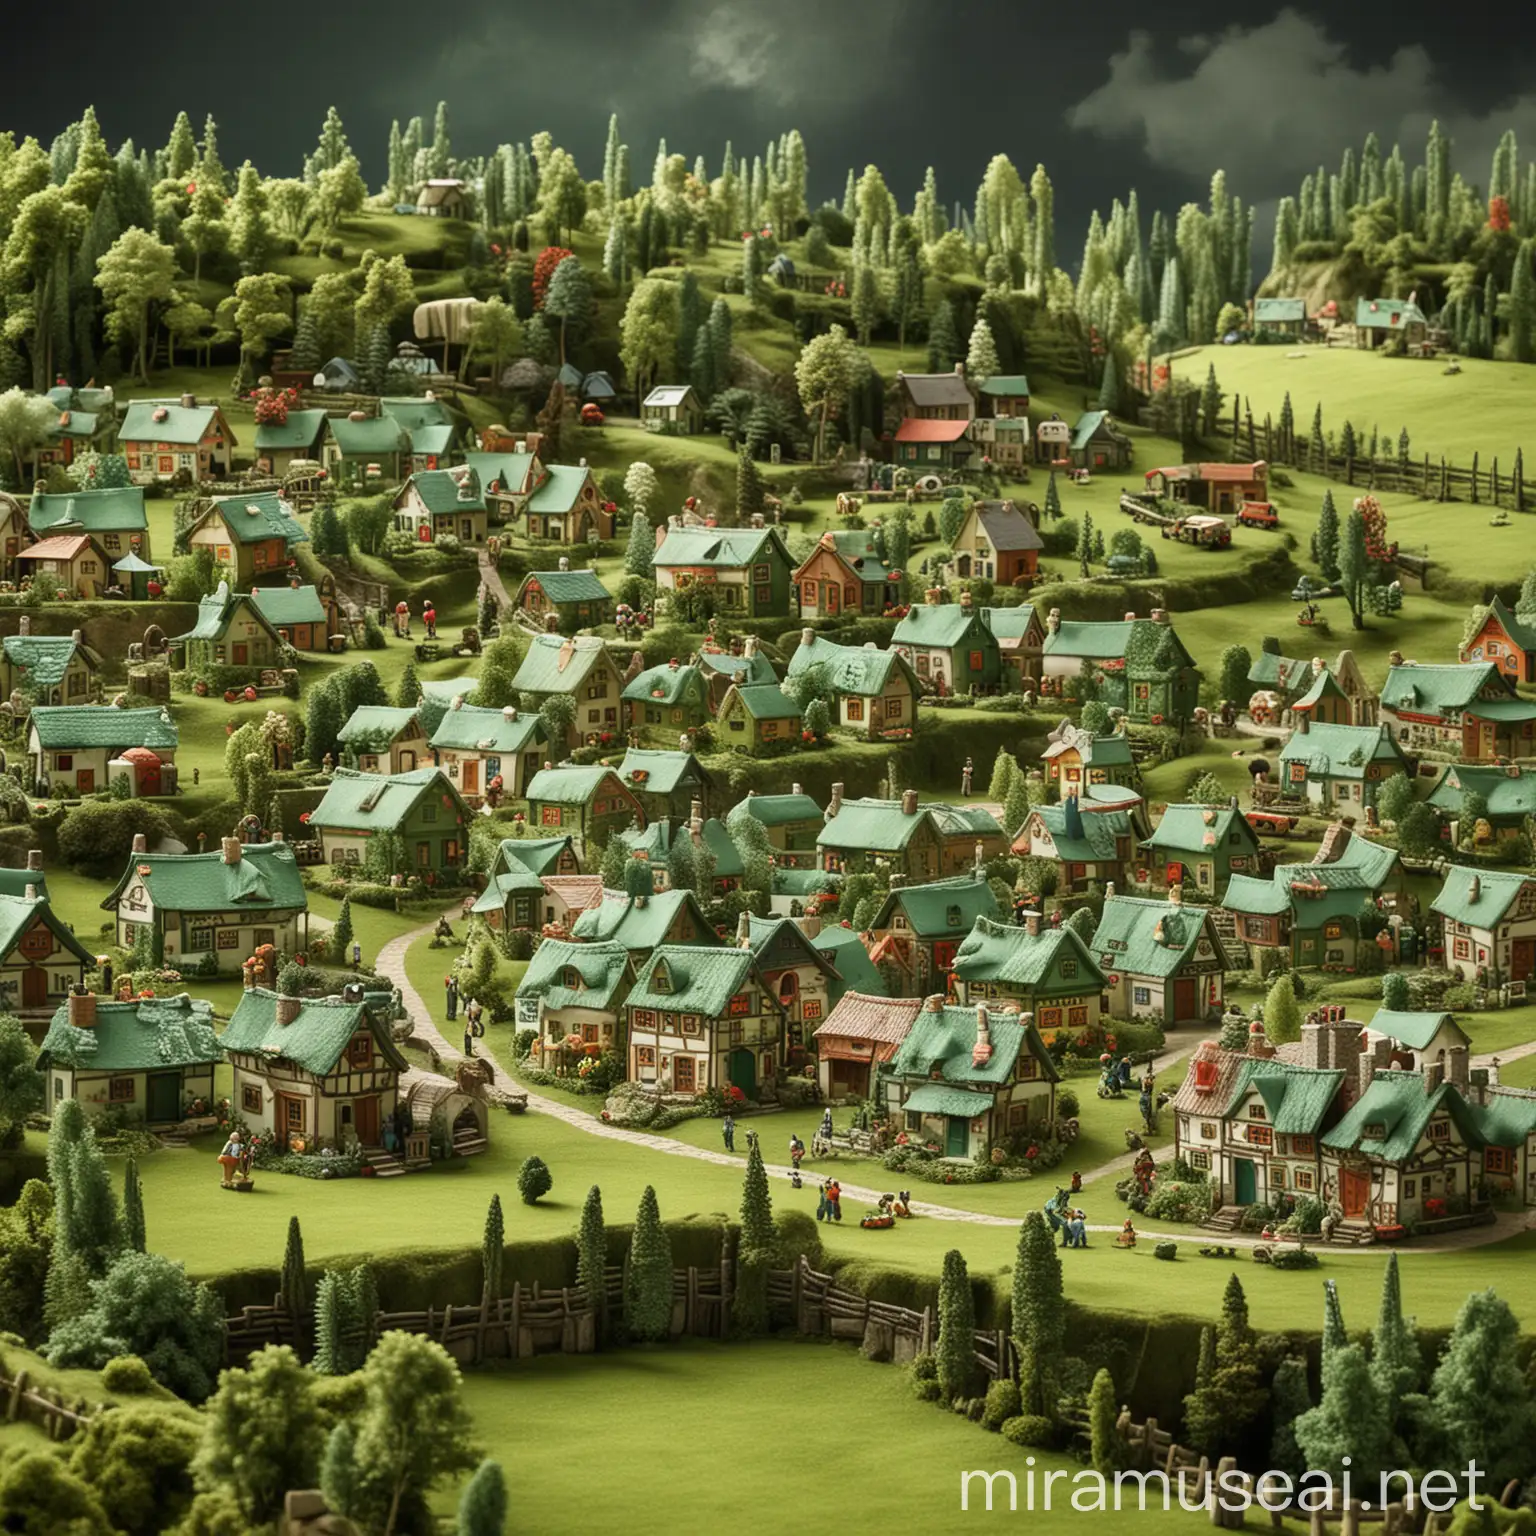 Idyllic Green Village Landscape with Tranquil Scenes